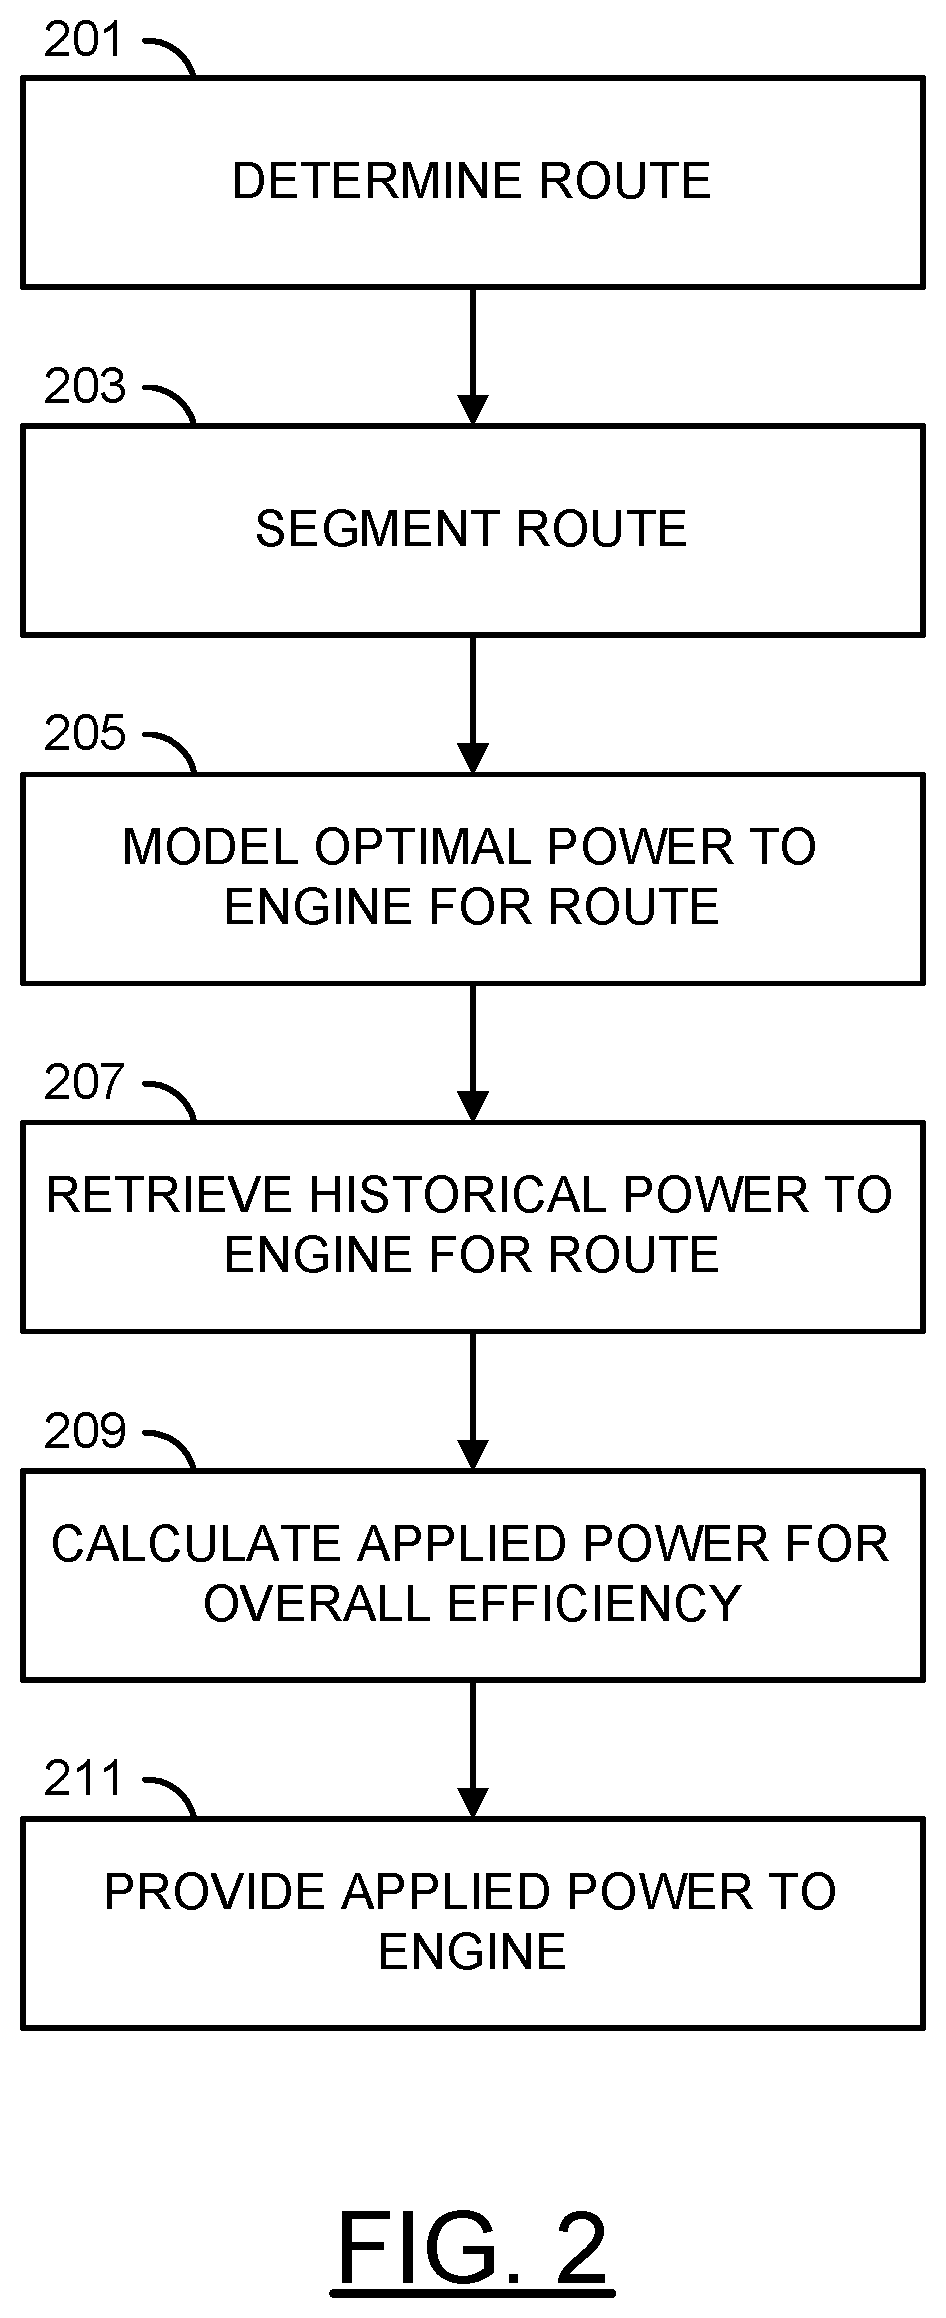 Vehicle power management system responsive to traffic conditions